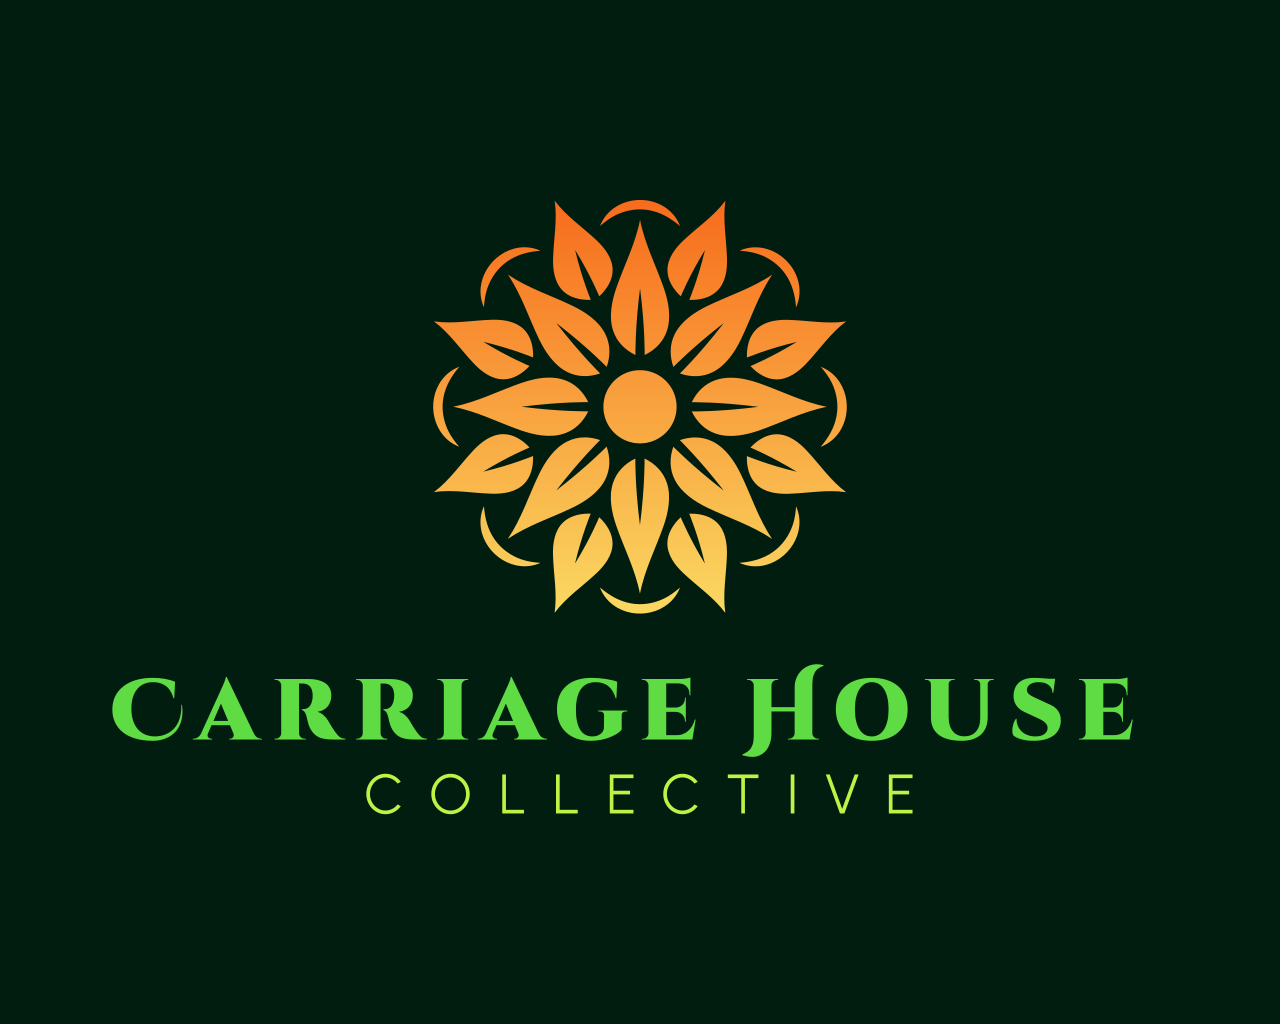 Carriage House Collective